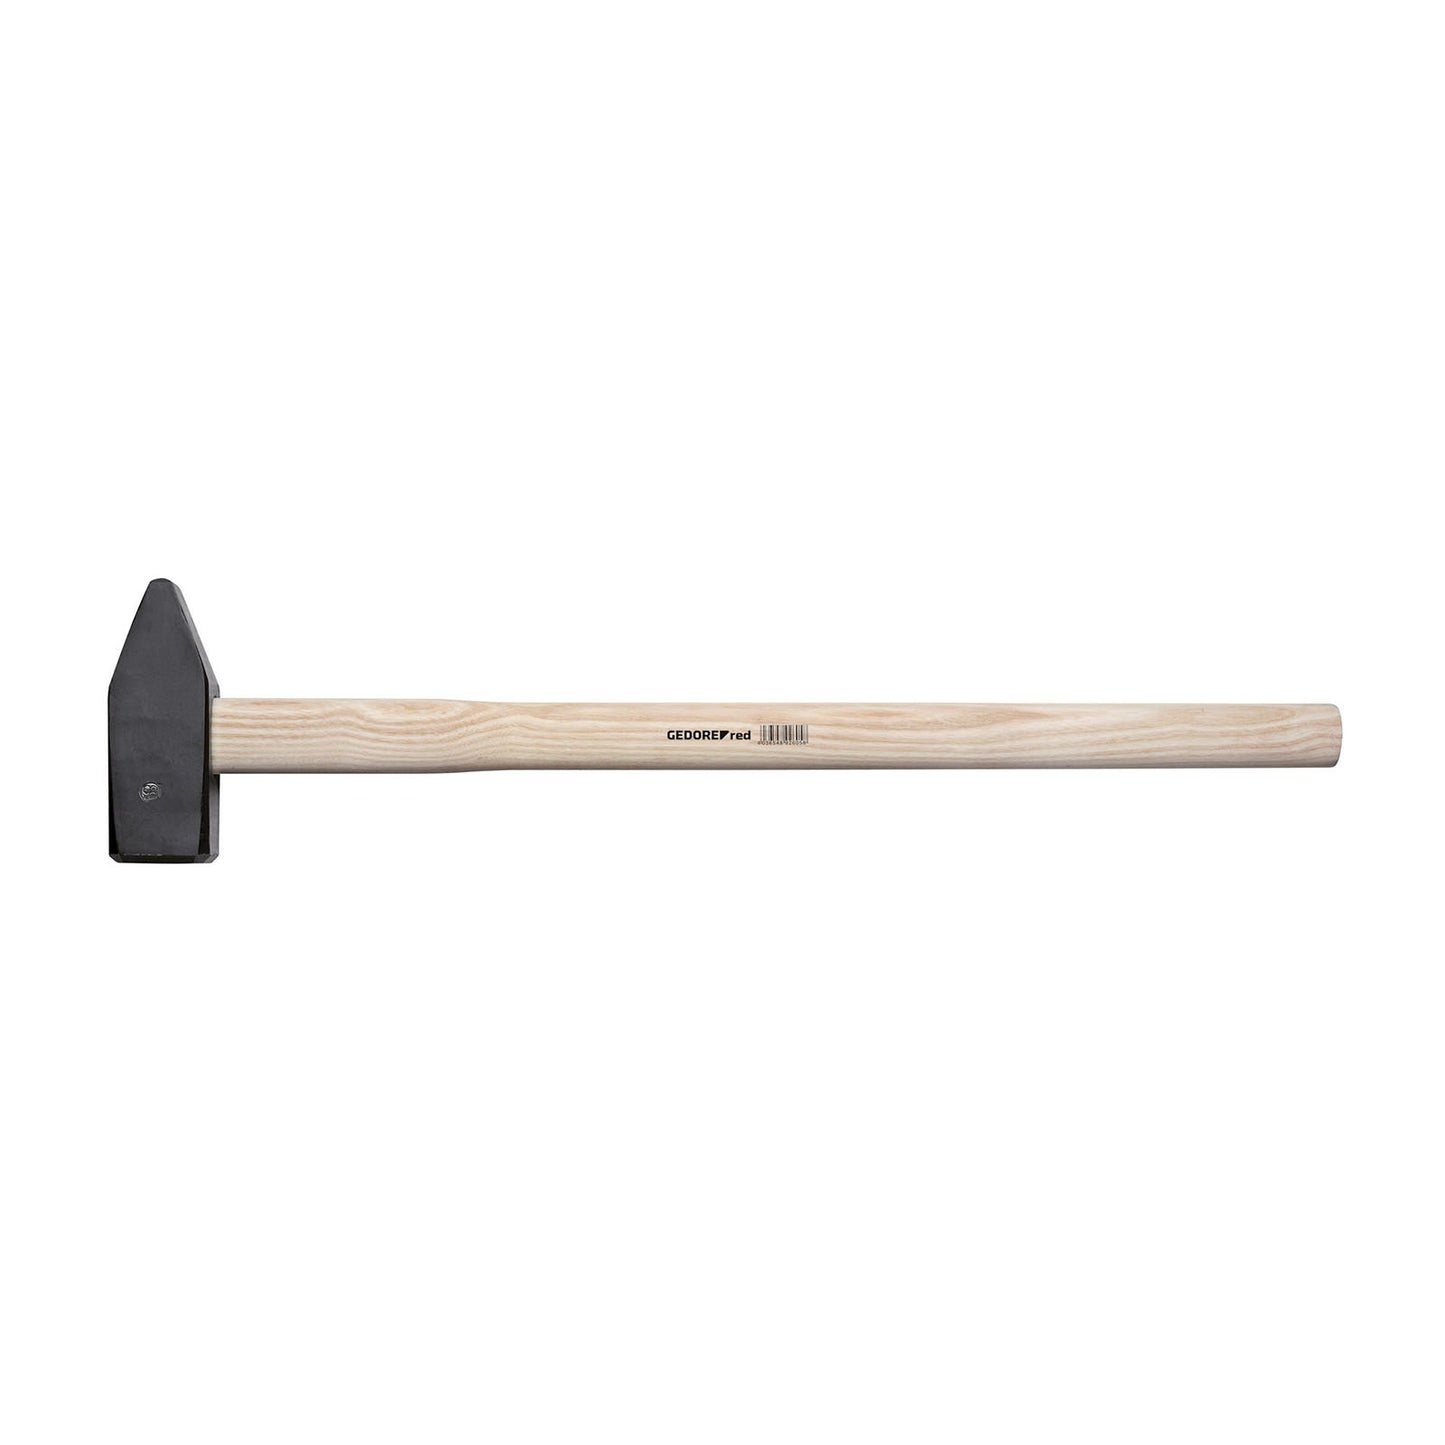 GEDORE red R92300083 - Forge hammer 5 kg L=800 mm ash (3300737)